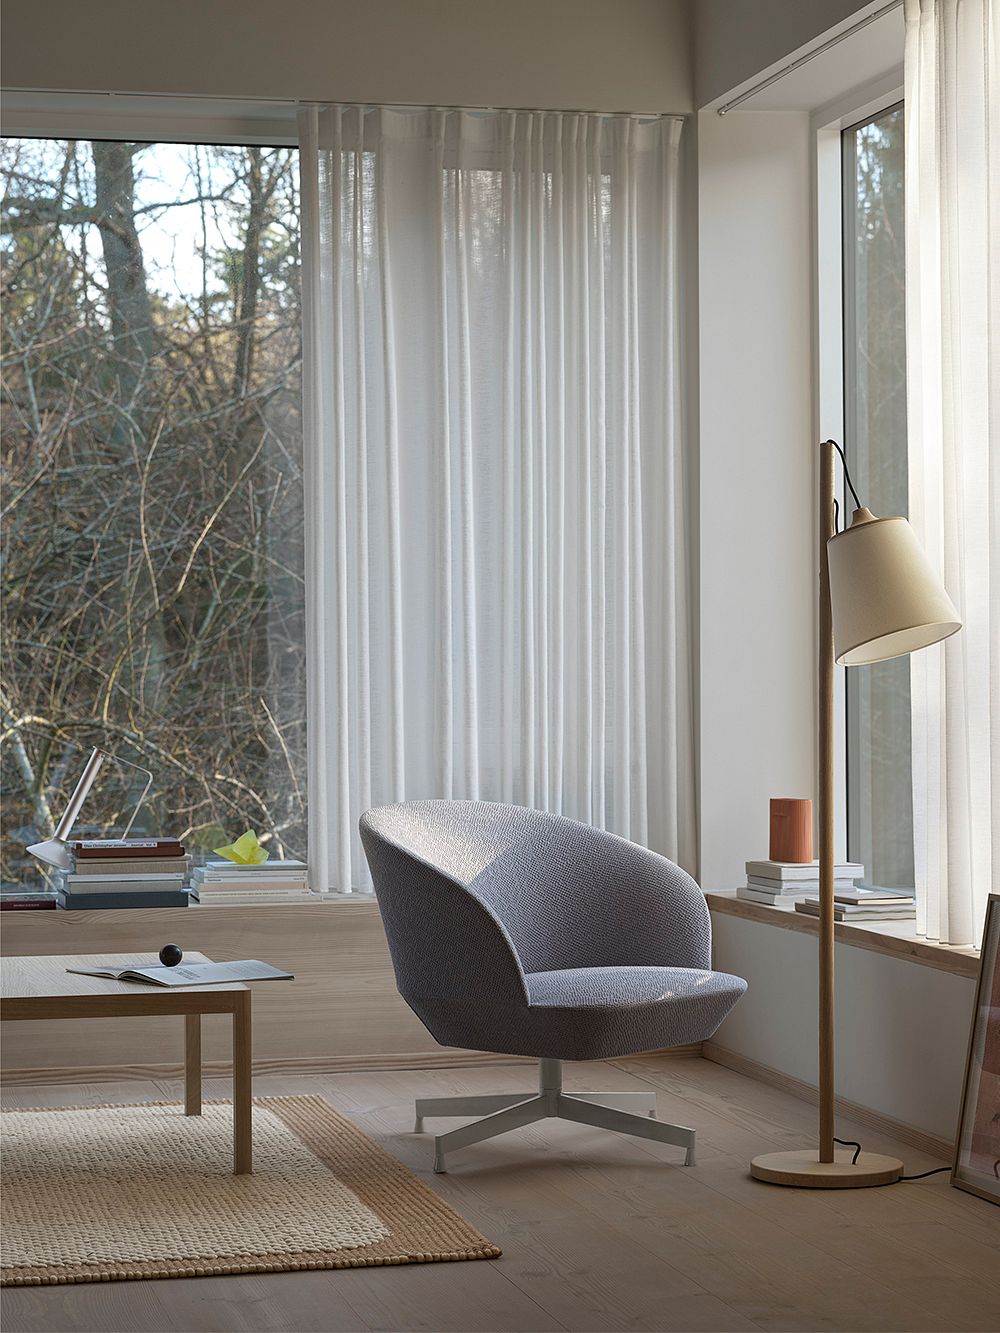 An image of Muuto's Oslo Lounge Chair as part of the living room decor